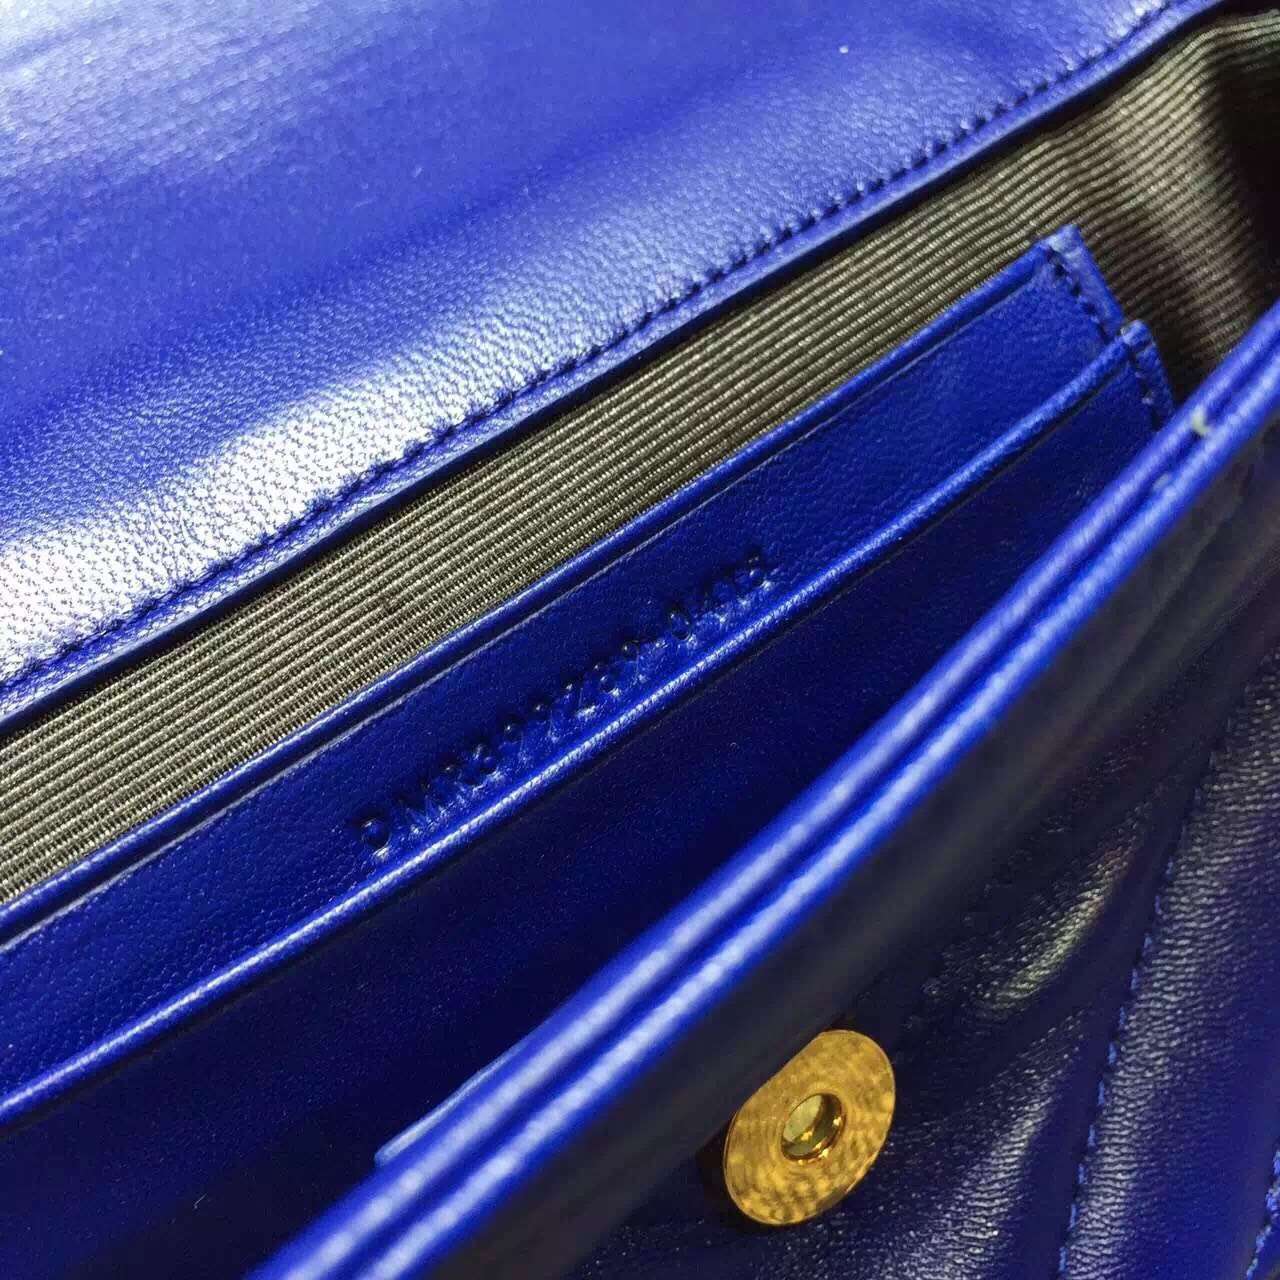 2015 Cheap YSL Outsale with Free Shipping-Saint Laurent Classic Baby Monogram Satchel in Electric Blue Matelasse Leather with Gold Hardware - Click Image to Close